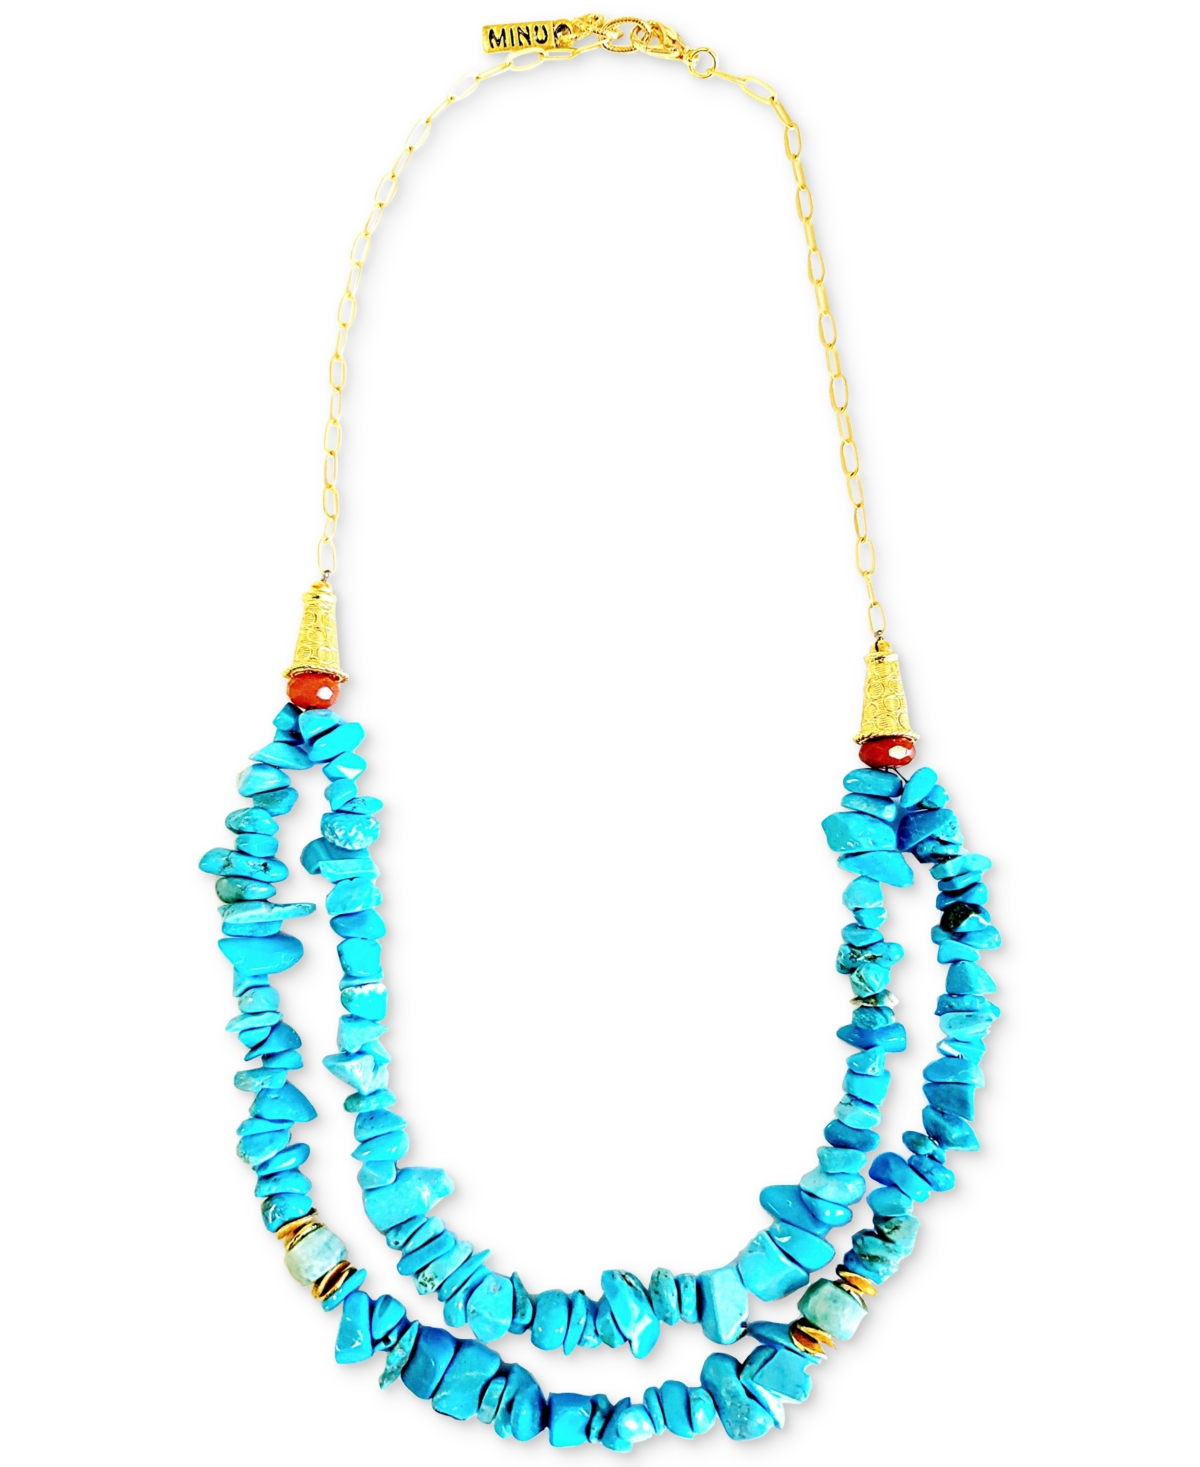 Minu Jewels Gold-Tone Amazonite & Turquoise Beaded Double-Row Statement Necklace, 16" + 2" extender